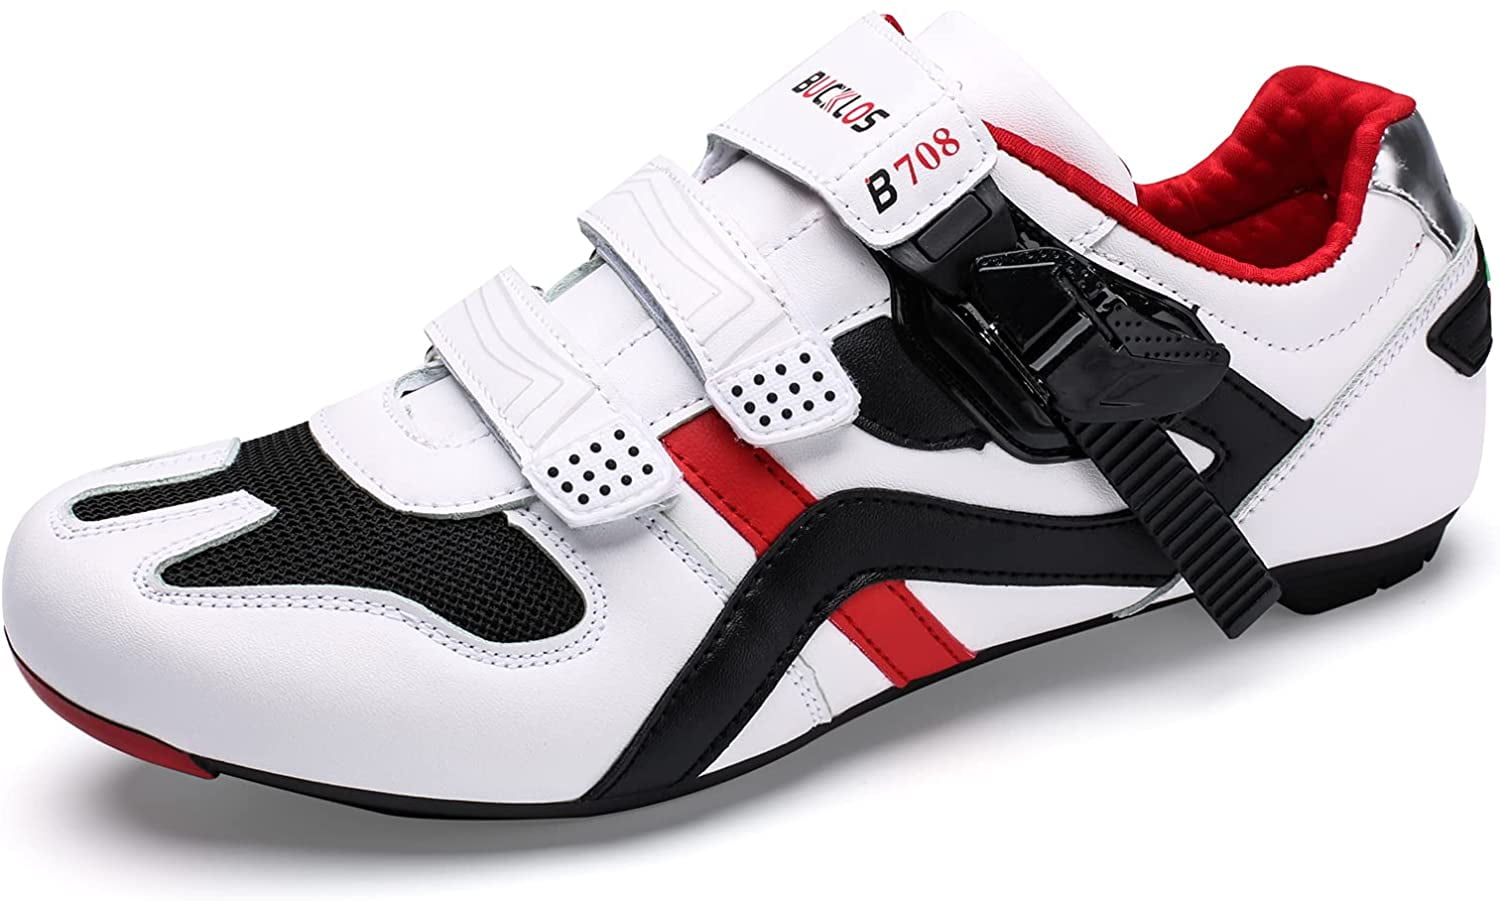 Cycling Shoes Mens Road Bike Shoes with Compatible Cleat Peloton Shoe with SPD and Delta,Indoor Cycling Shoes for Men Lock Pedal Bike Shoes 